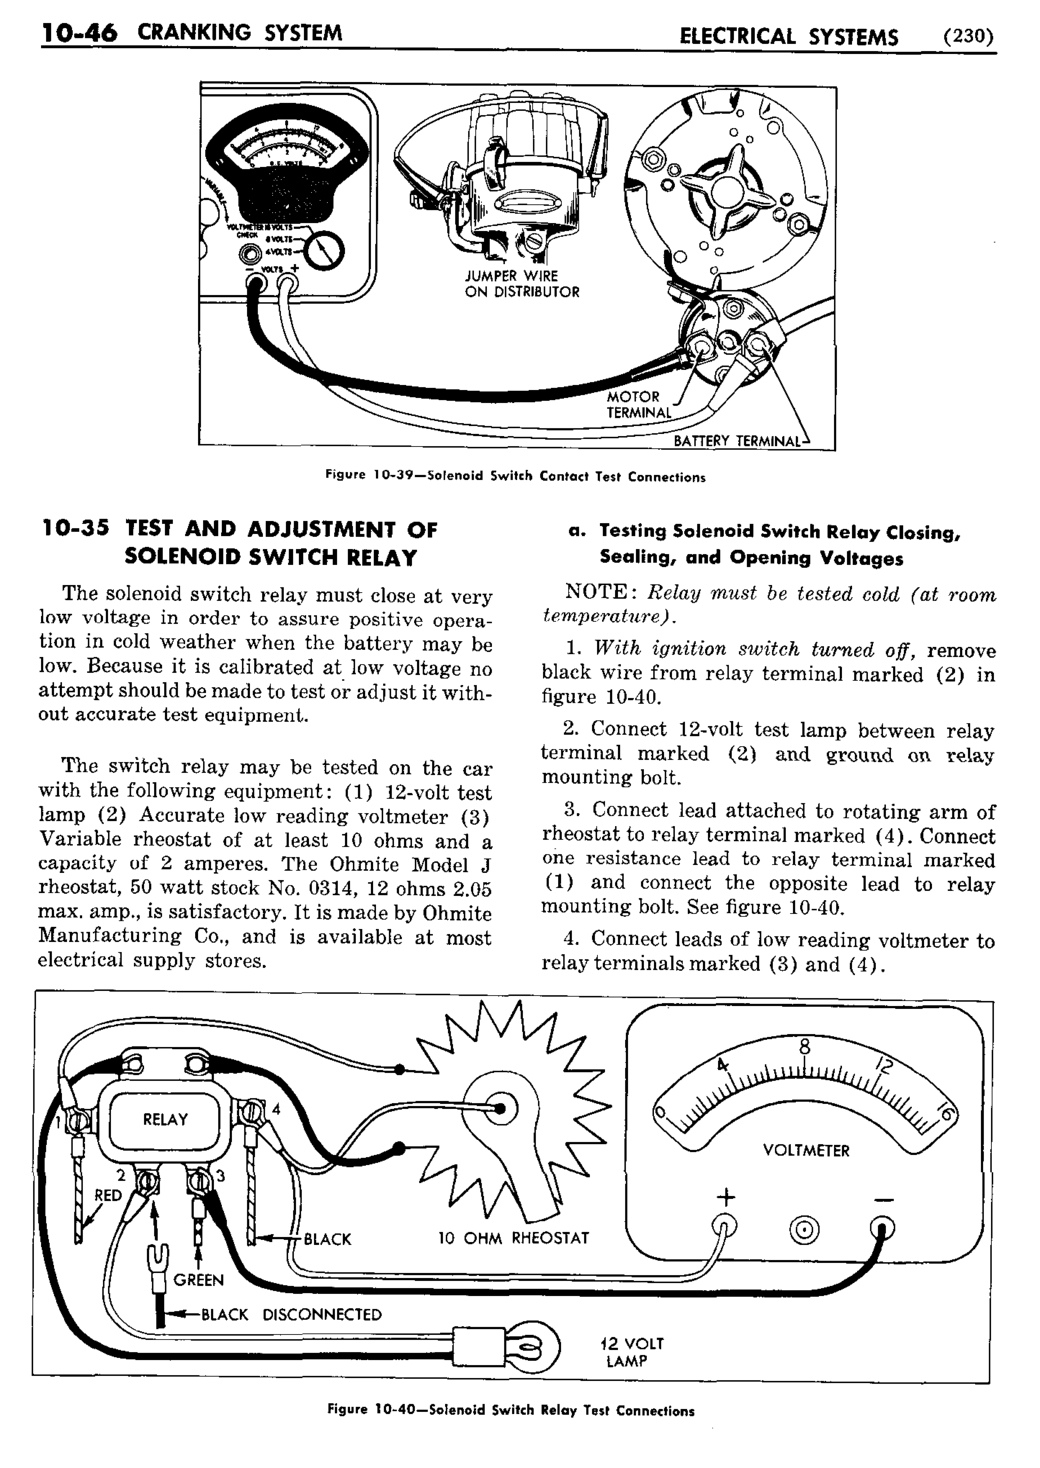 n_11 1953 Buick Shop Manual - Electrical Systems-046-046.jpg